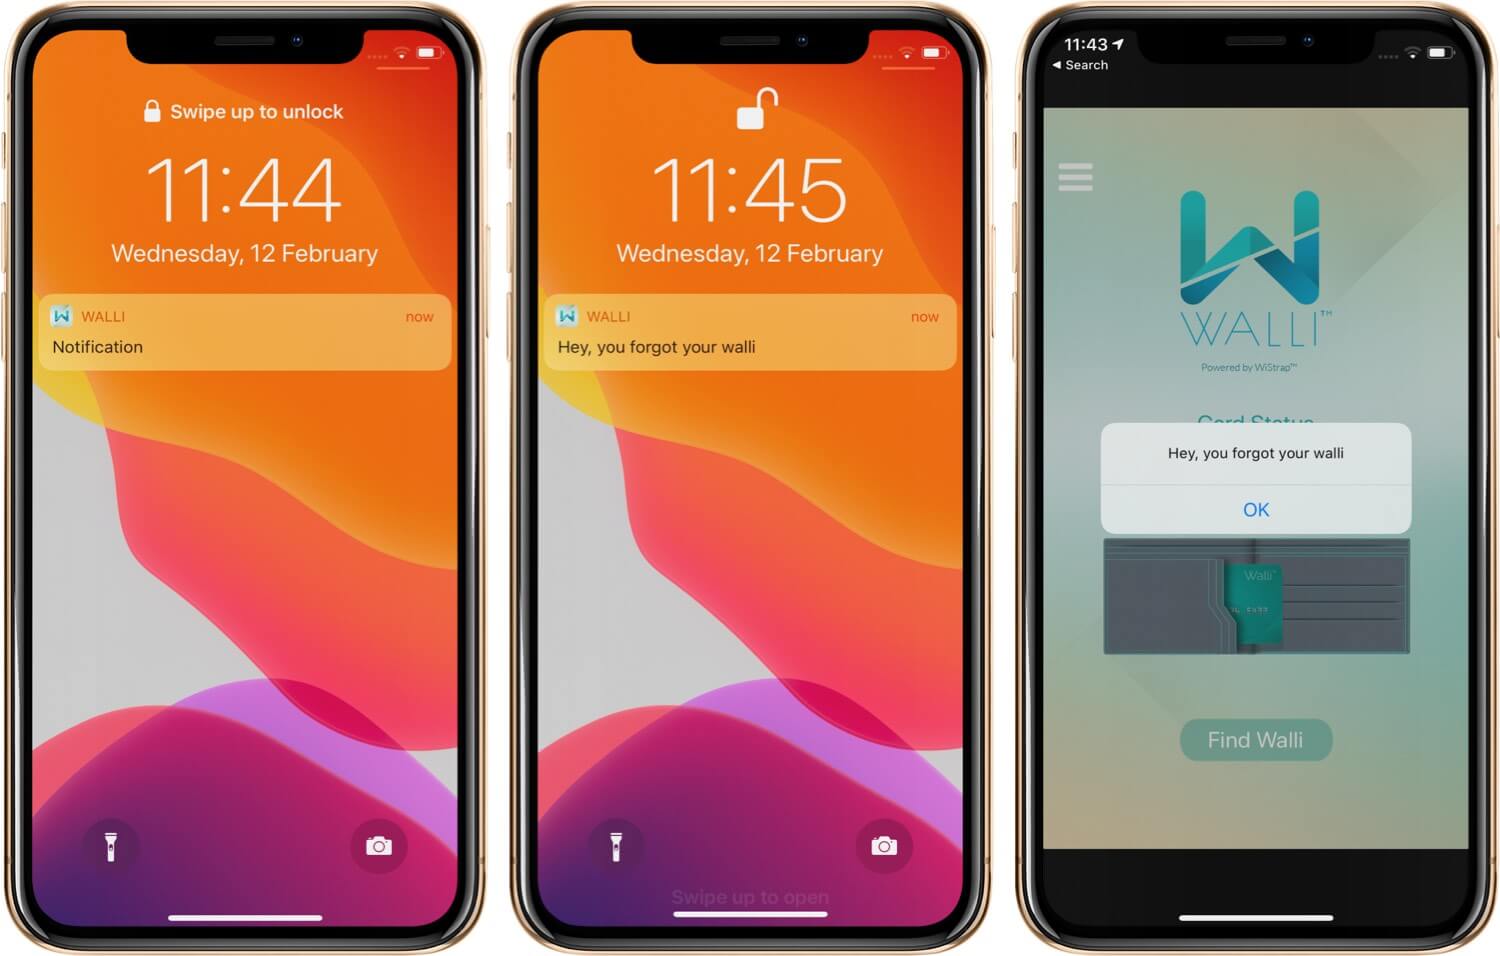 Get Walli App Notification on iPhone When You Leave Your Wallet